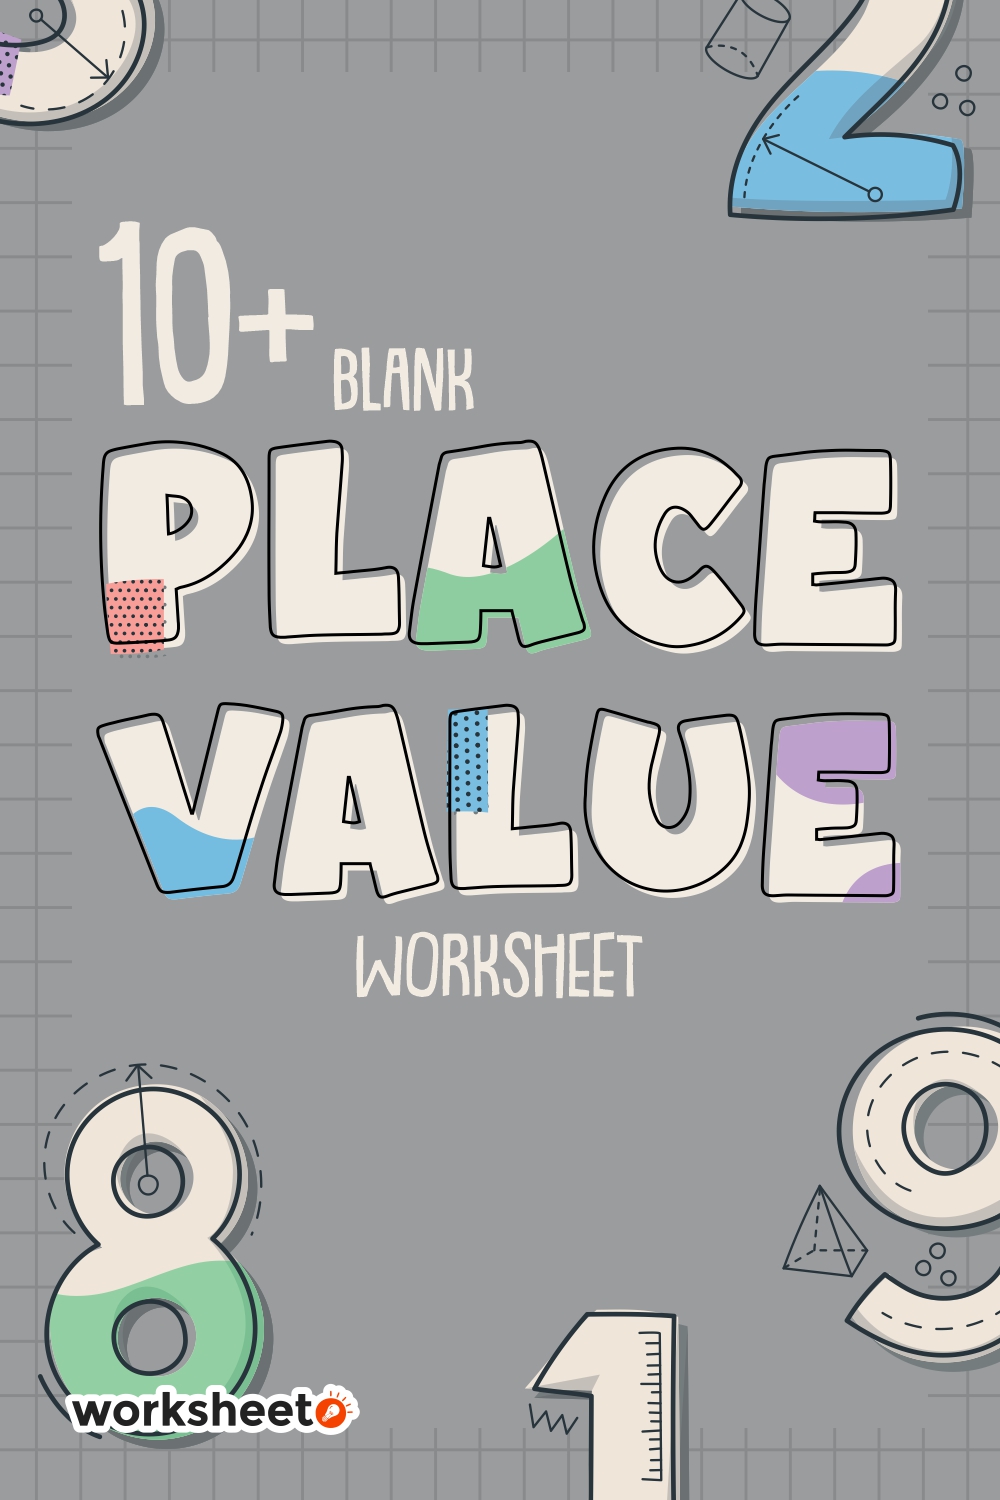 14 Images of Blank Place Value Worksheets